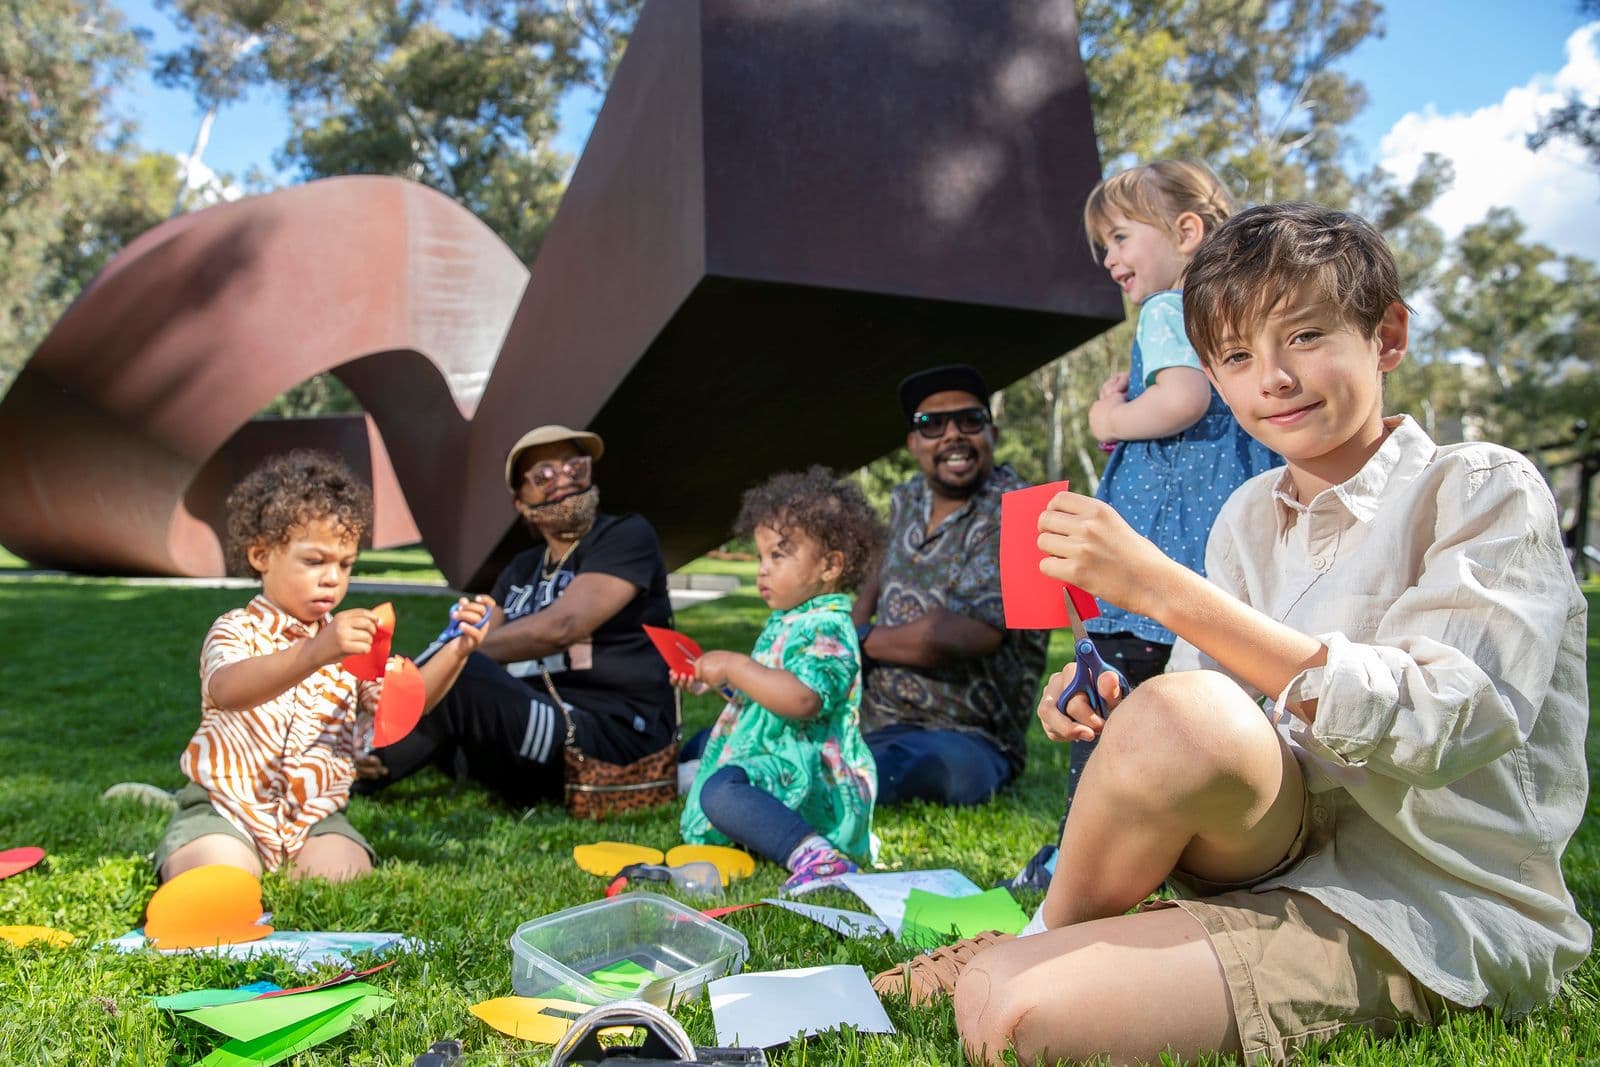 Two adults sit with four children in front of a sculpture in the sculpture garden making art with paper